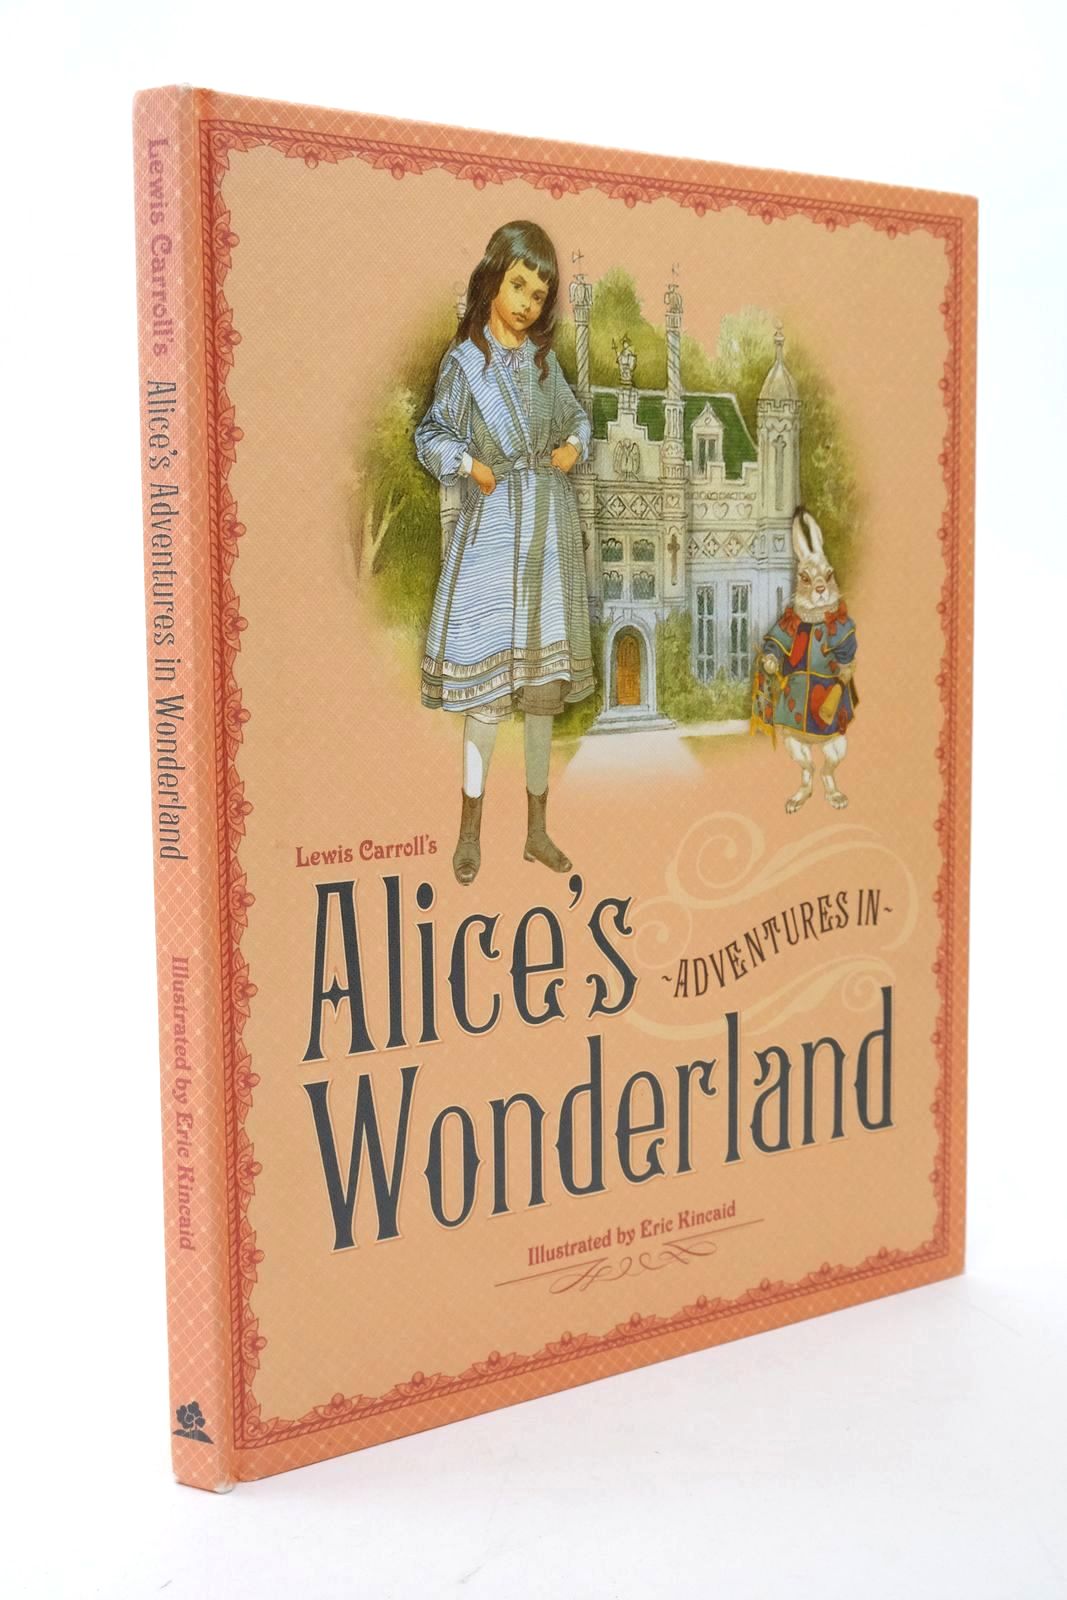 Photo of ALICE'S ADVENTURES IN WONDERLAND written by Carroll, Lewis illustrated by Kincaid, Eric published by The Five Mile Press (STOCK CODE: 1322724)  for sale by Stella & Rose's Books